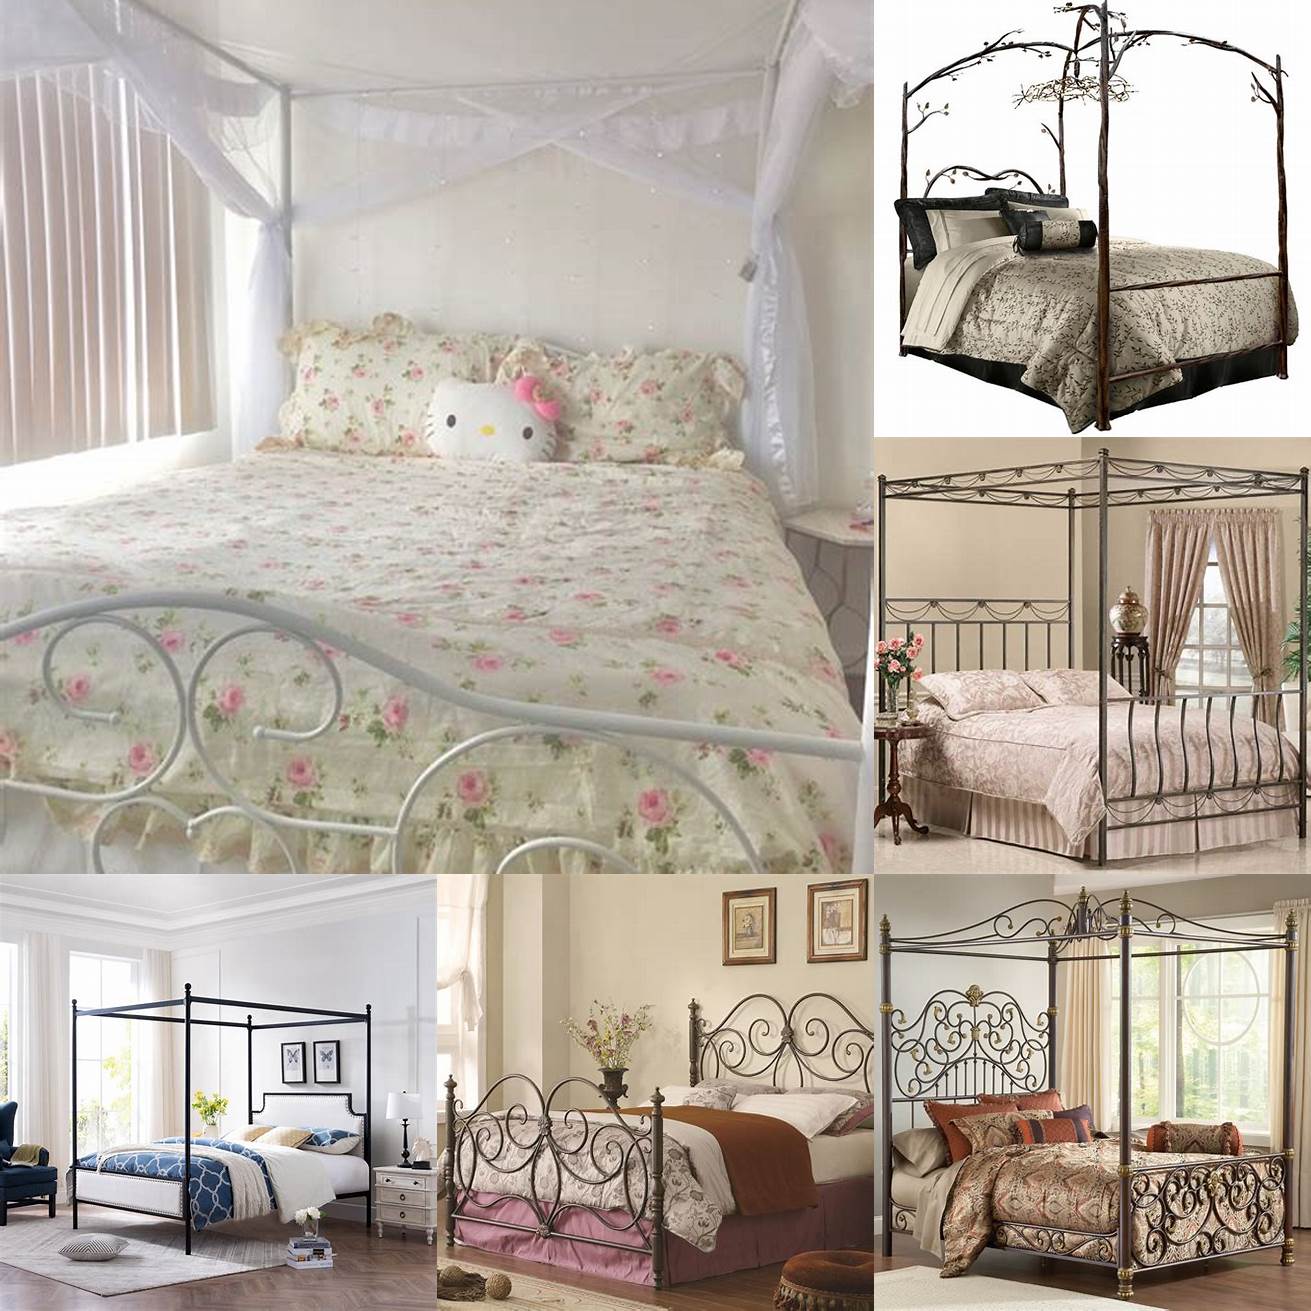 Canopy iron bed frame queen with pink bedding and fairy lights